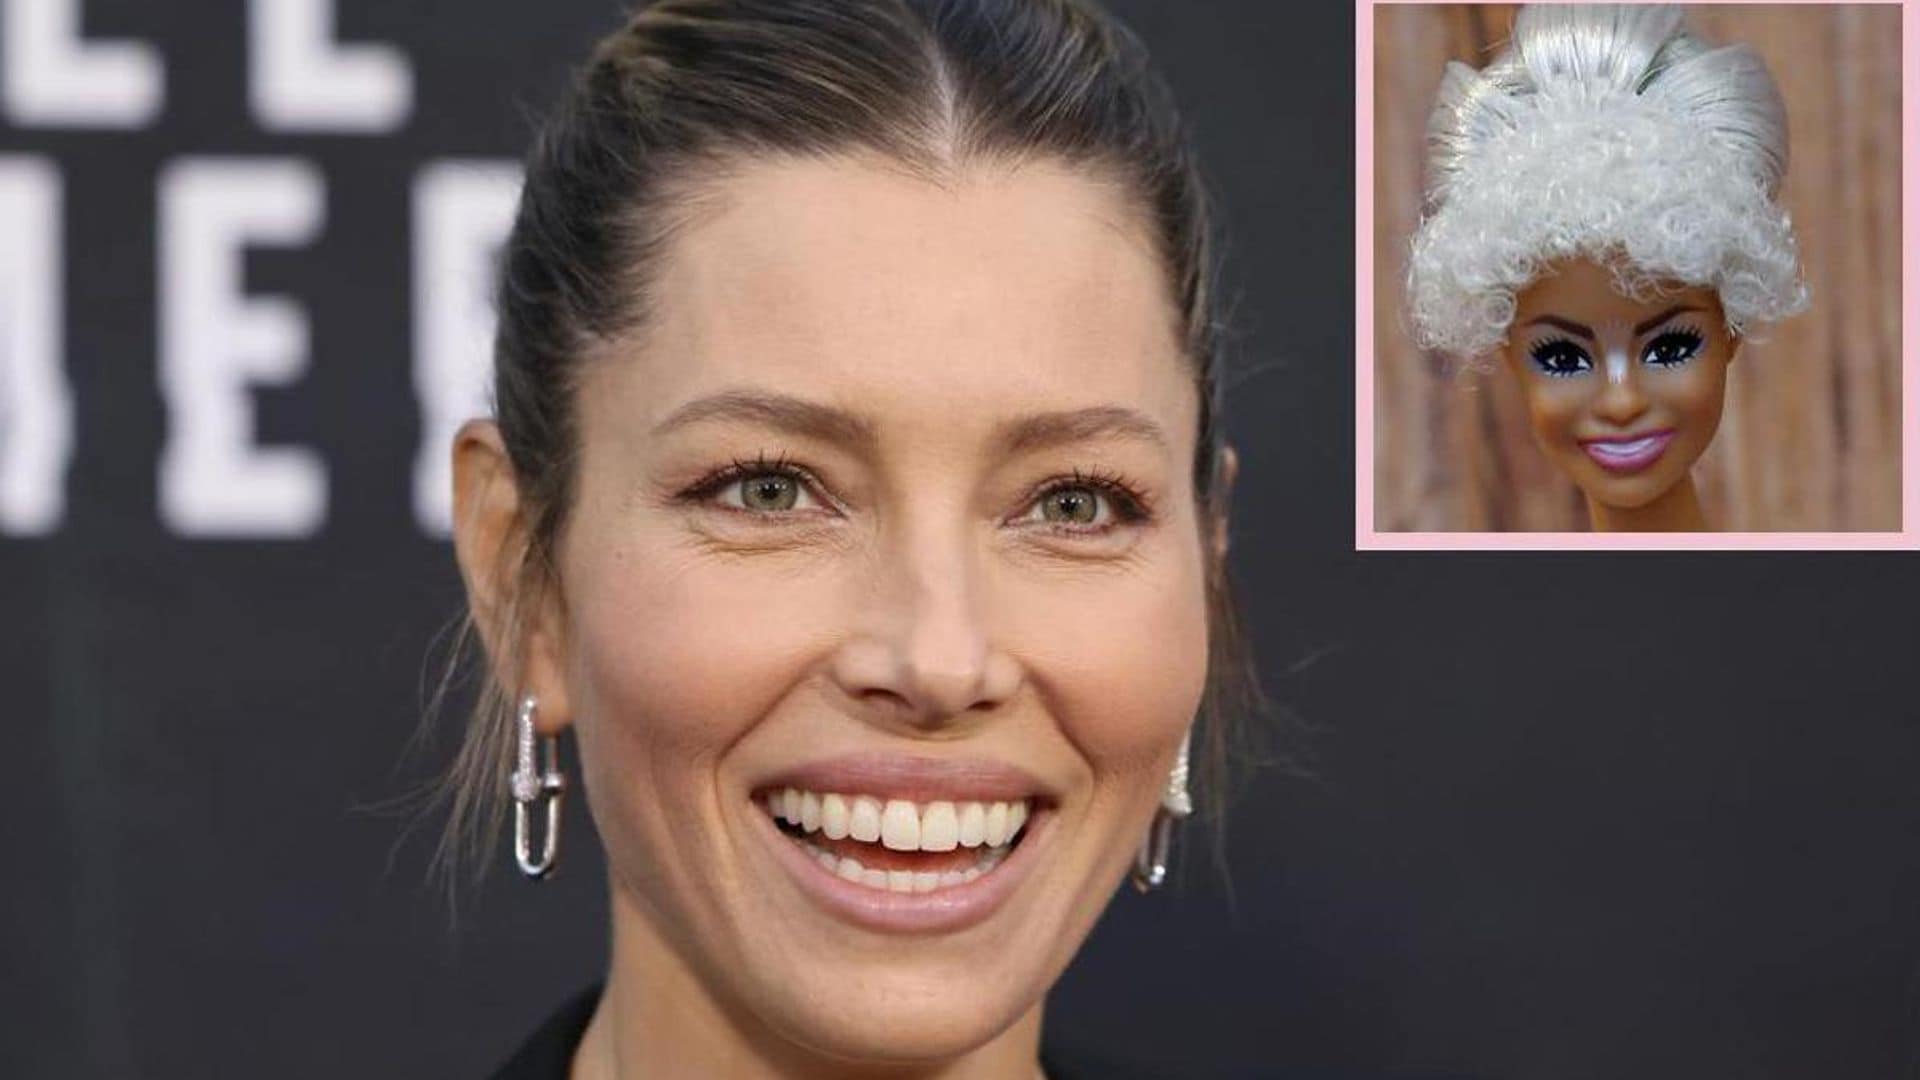 Jessica Biel shares the hilarious way she used her Barbie heads as Christmas decorations